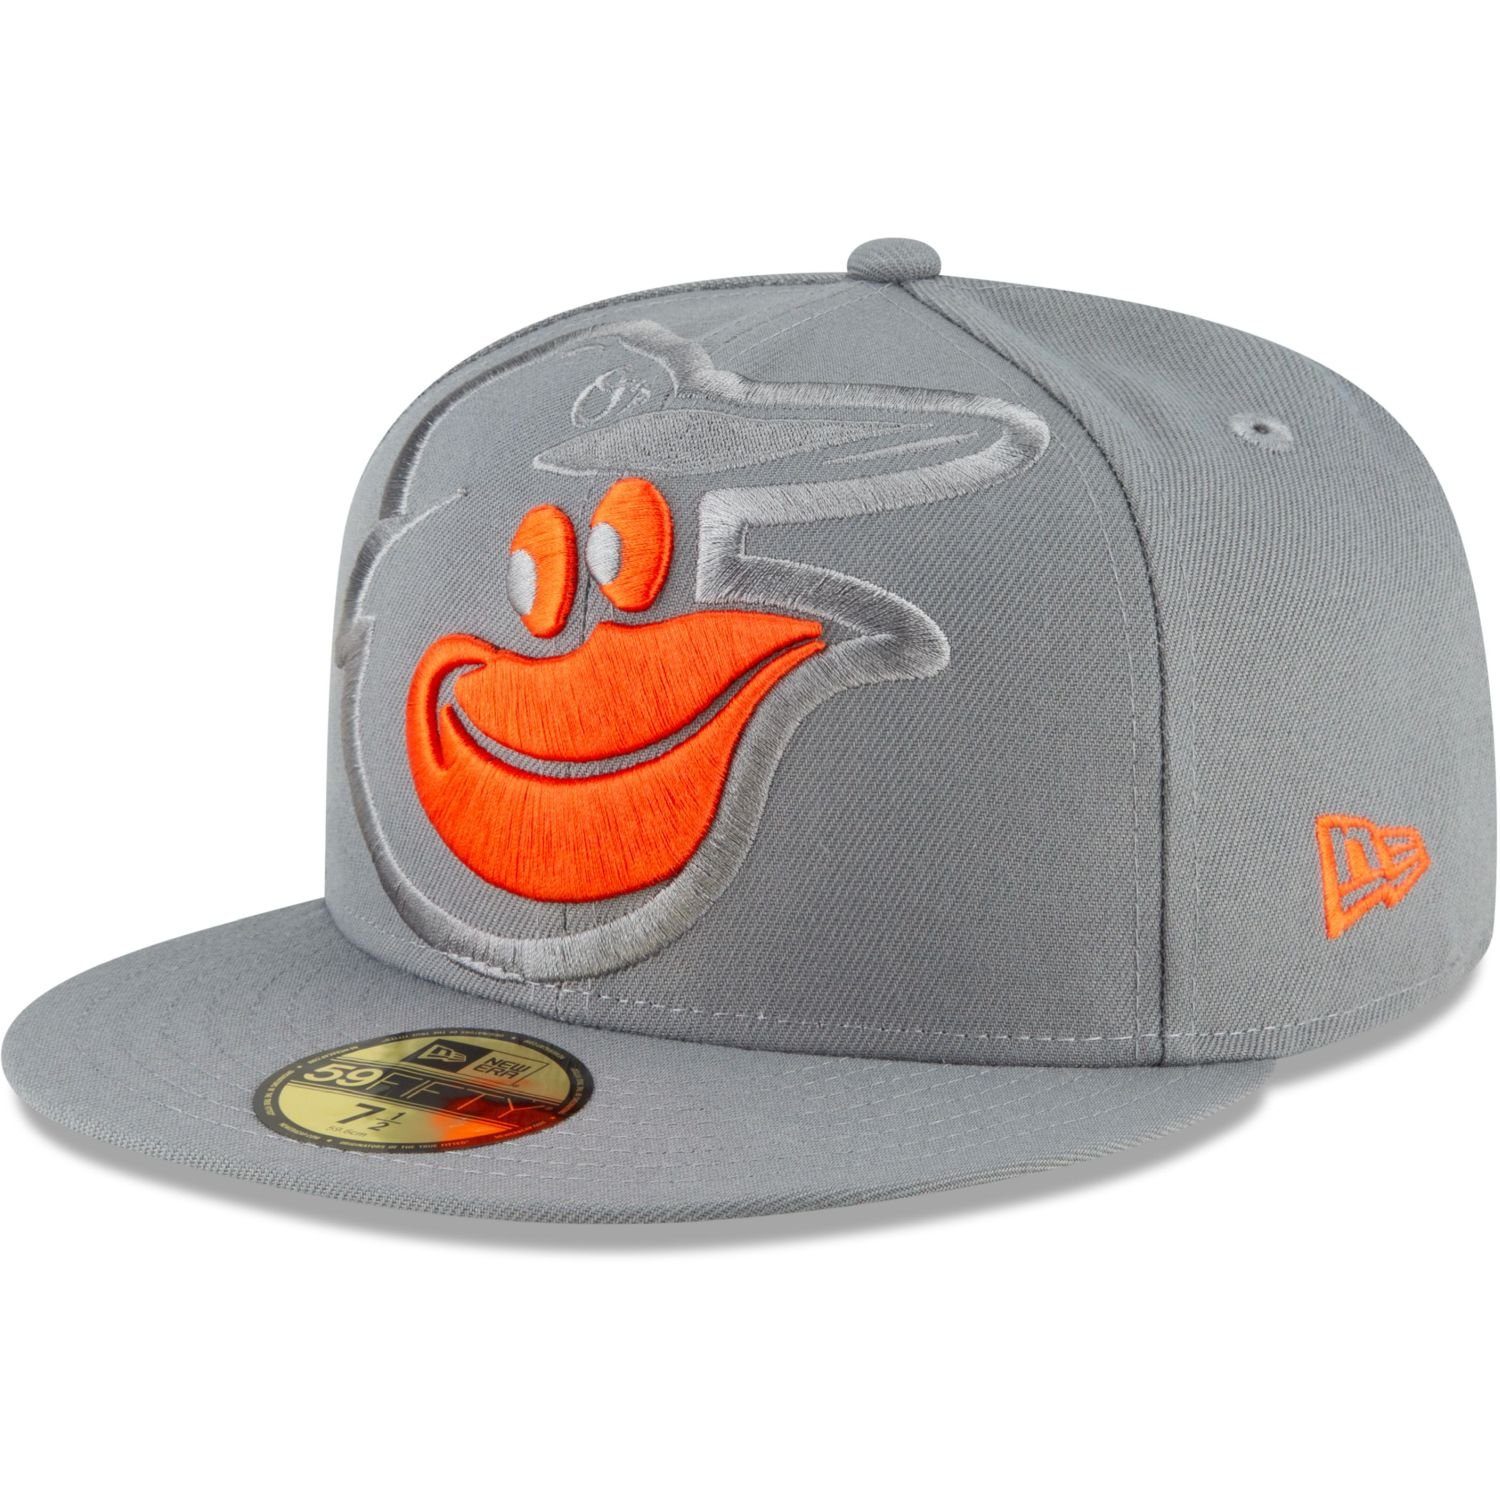 New Era Fitted Cap 59Fifty STORM GREY MLB Cooperstown Team Baltimore Orioles